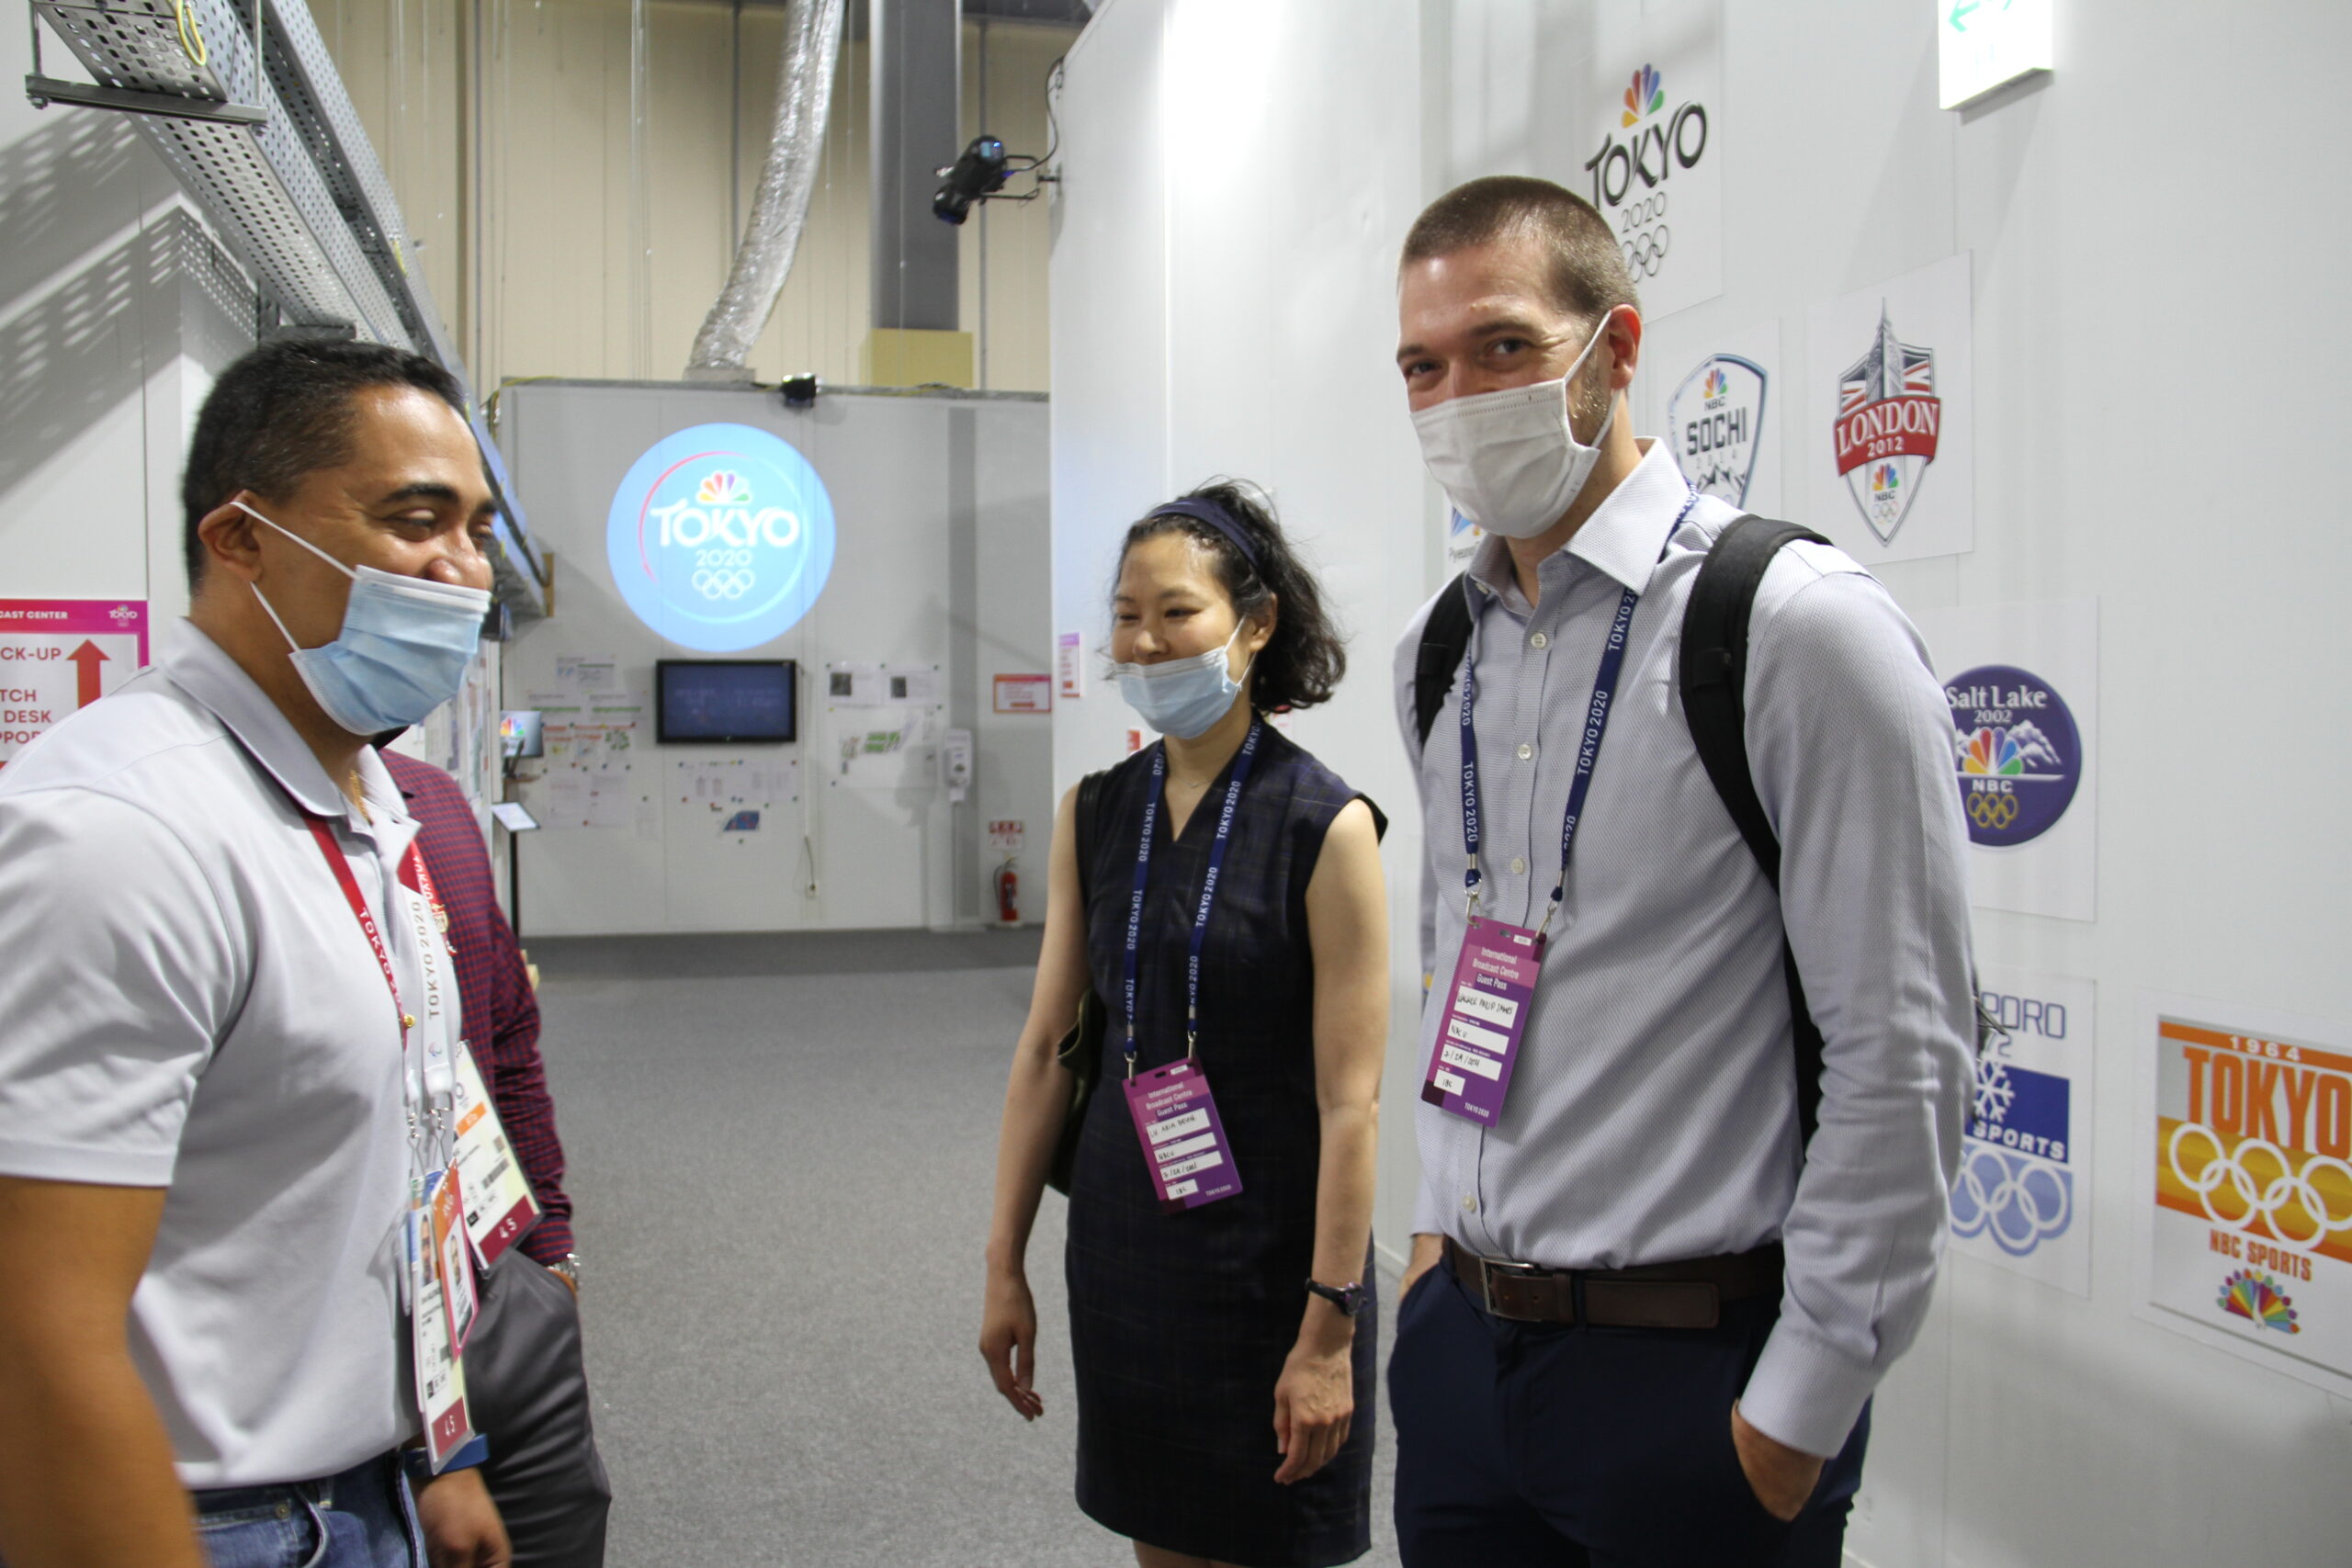 Walker (far right), DSS Special Agent and Beijing Olympic Security Coordinator Aria Lu (center) and NBC Sports Group vice president of Global Security (left) at the NBC studio at the International Broadcasting Center, Tokyo, Japan, July 24, 2021. (U.S. Department of State photo)